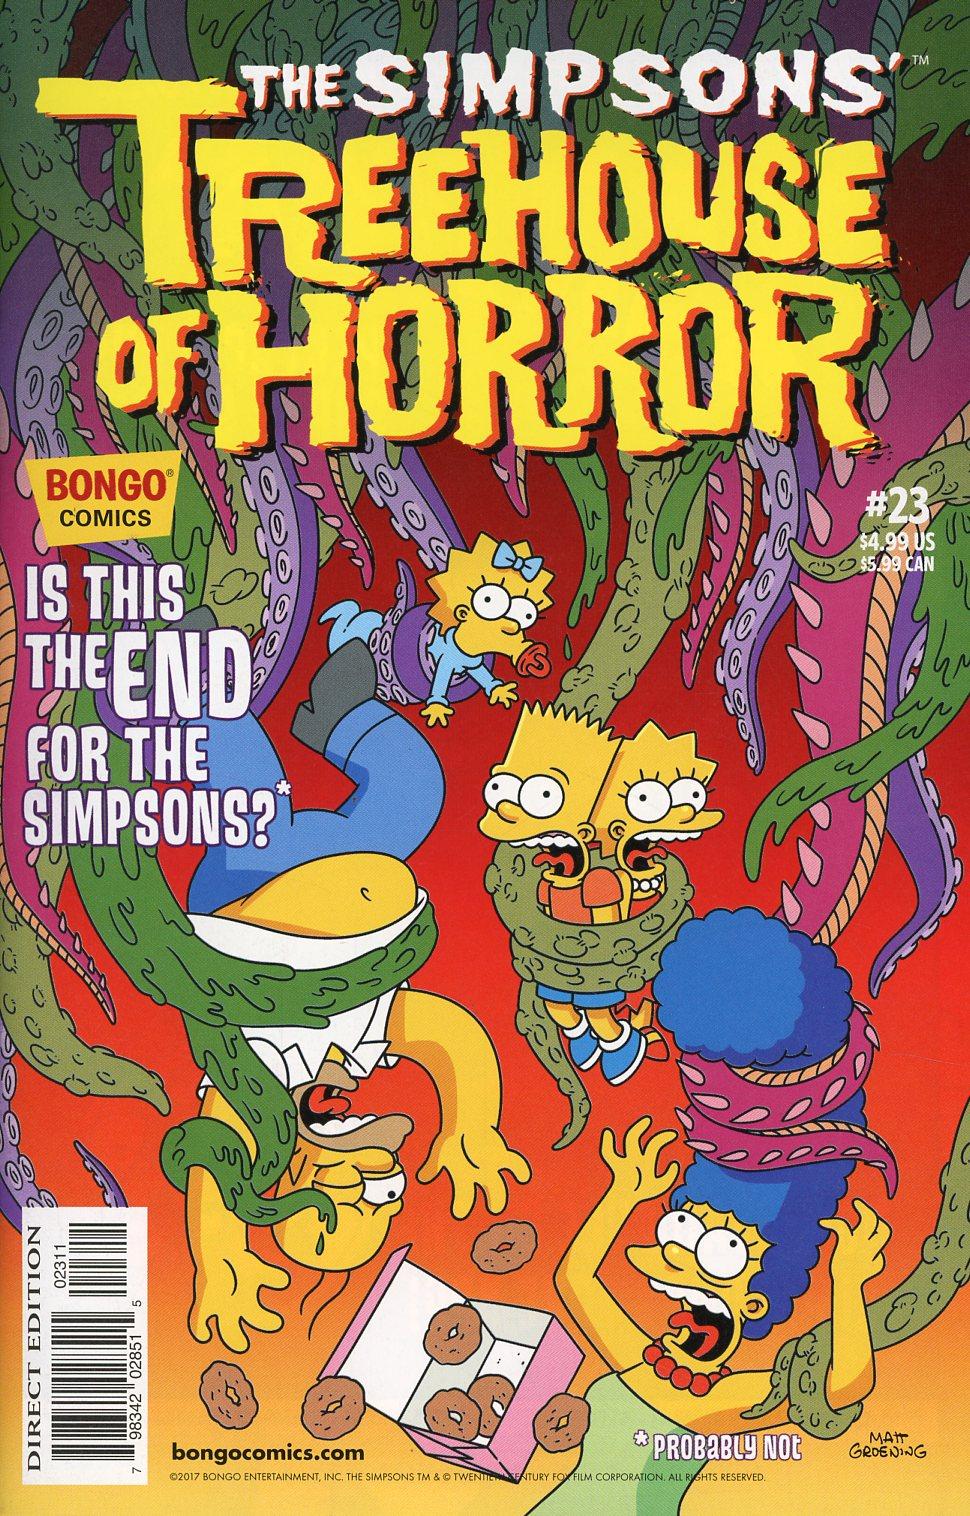 Simpsons Treehouse Of Horror Vol. 1 #23